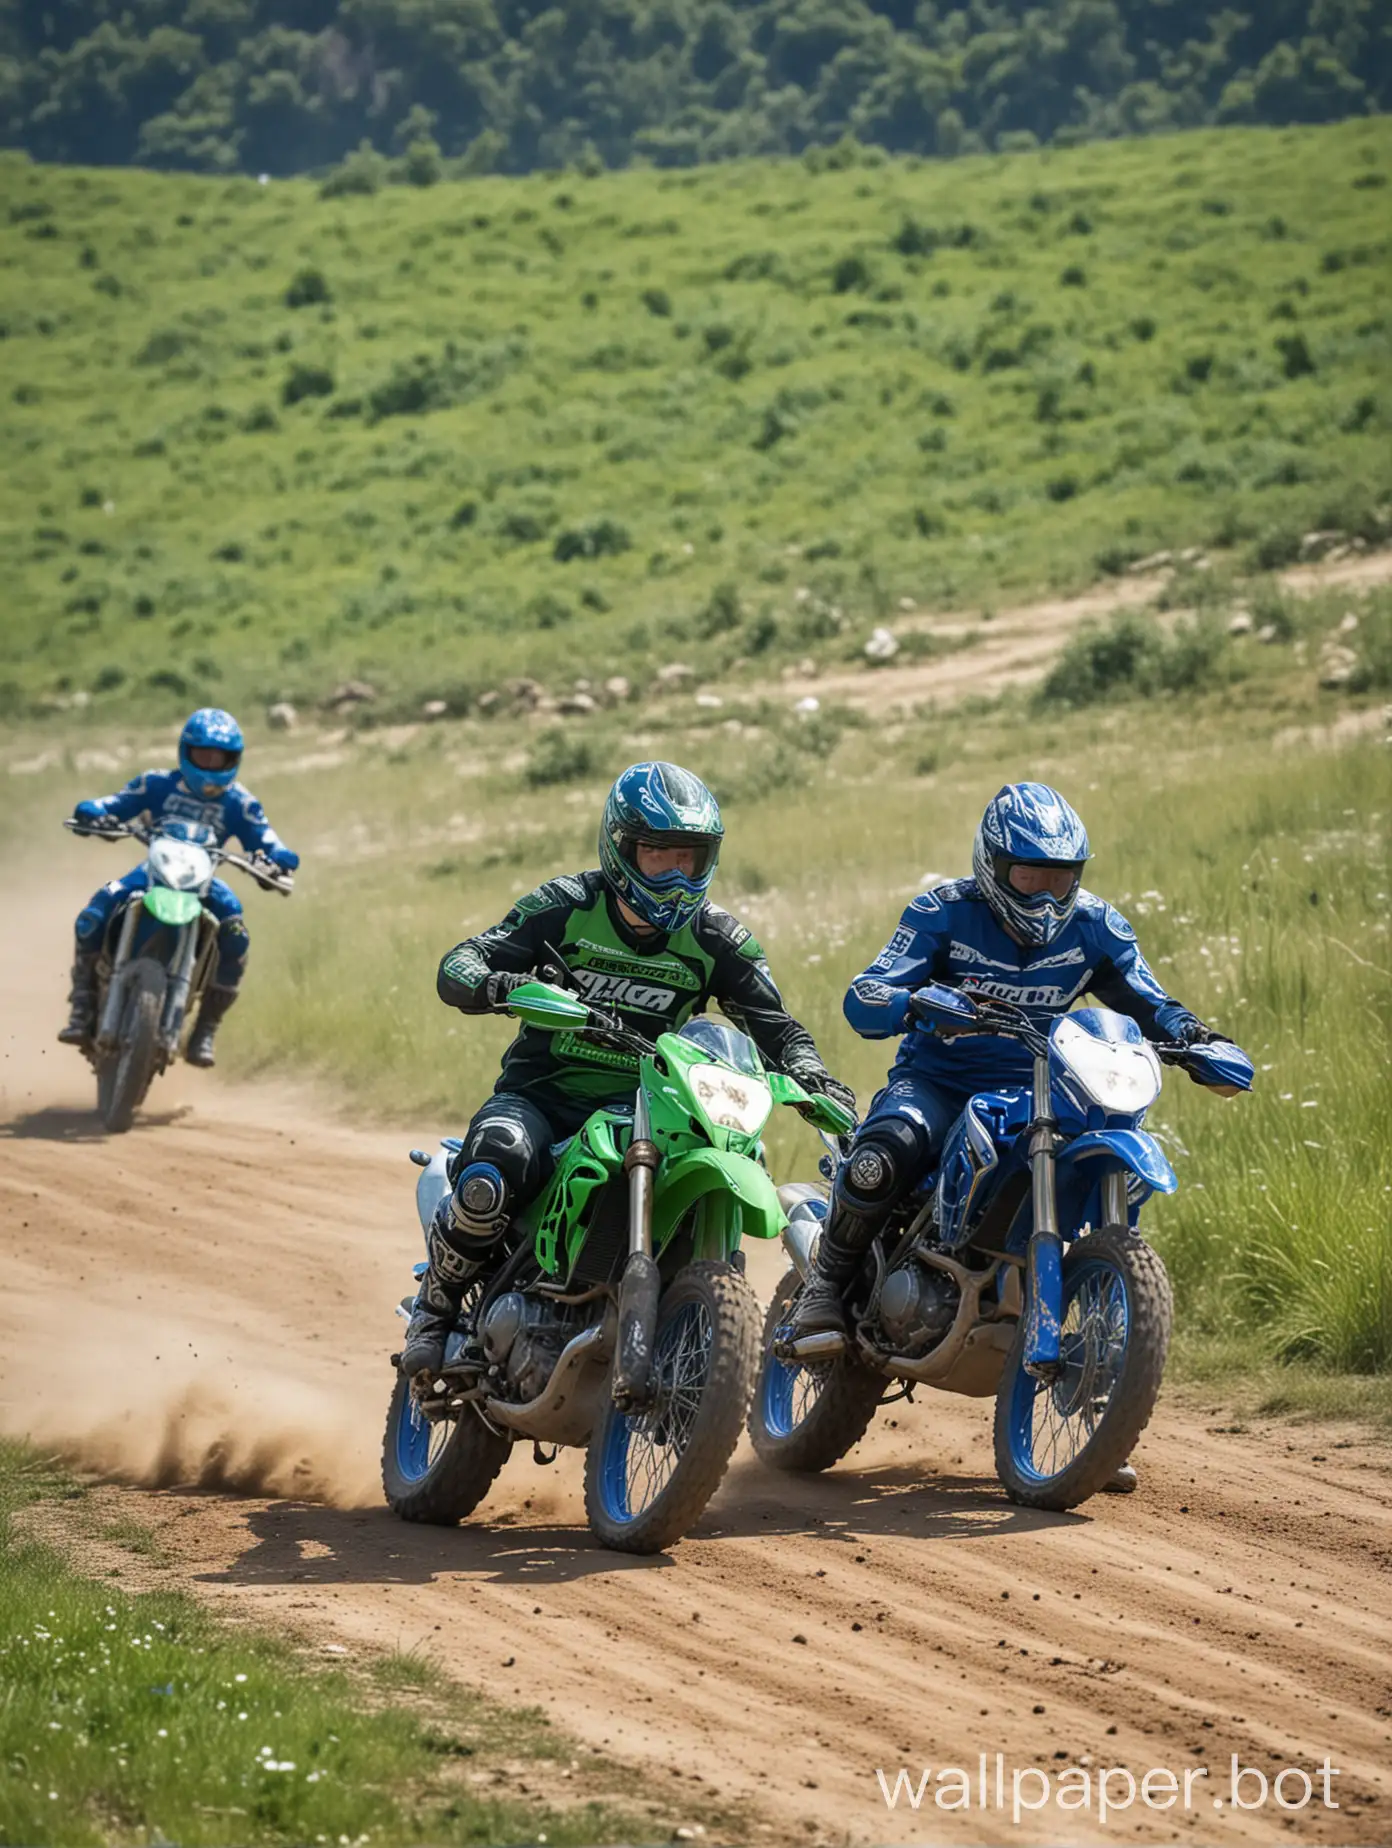 Intense-Motorcycle-Race-Dueling-Bikers-in-Green-and-Blue